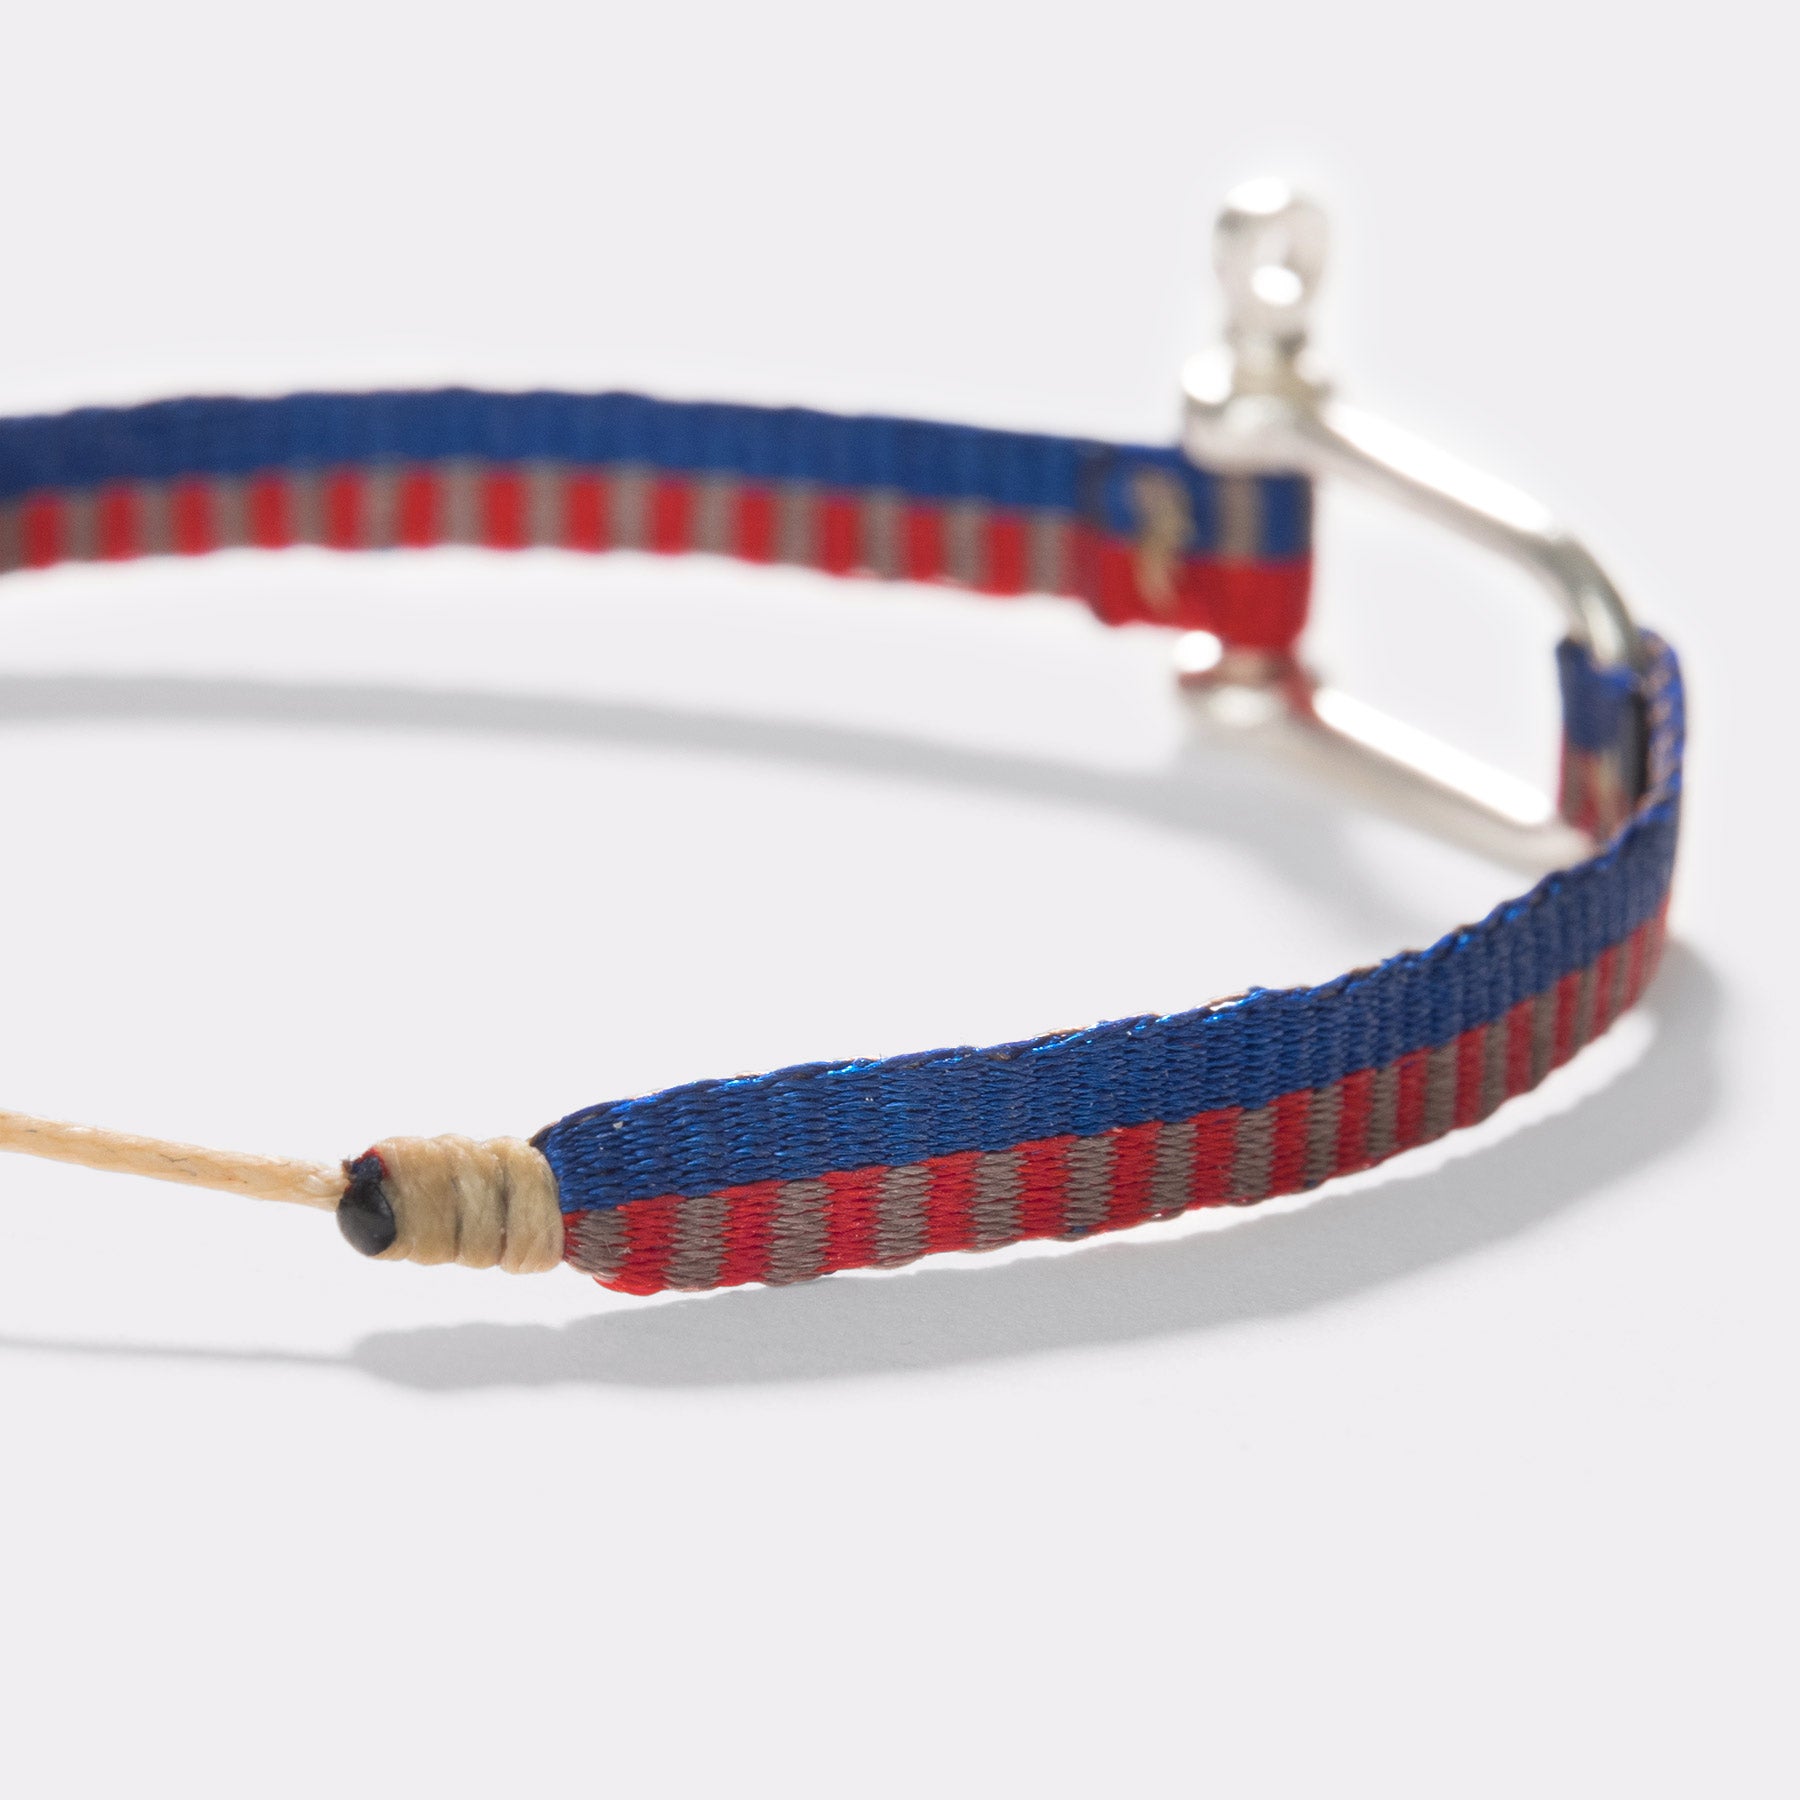 Guanabana Handmade Woven Bracelet Bracelet Blue and Red with Horse Shoe